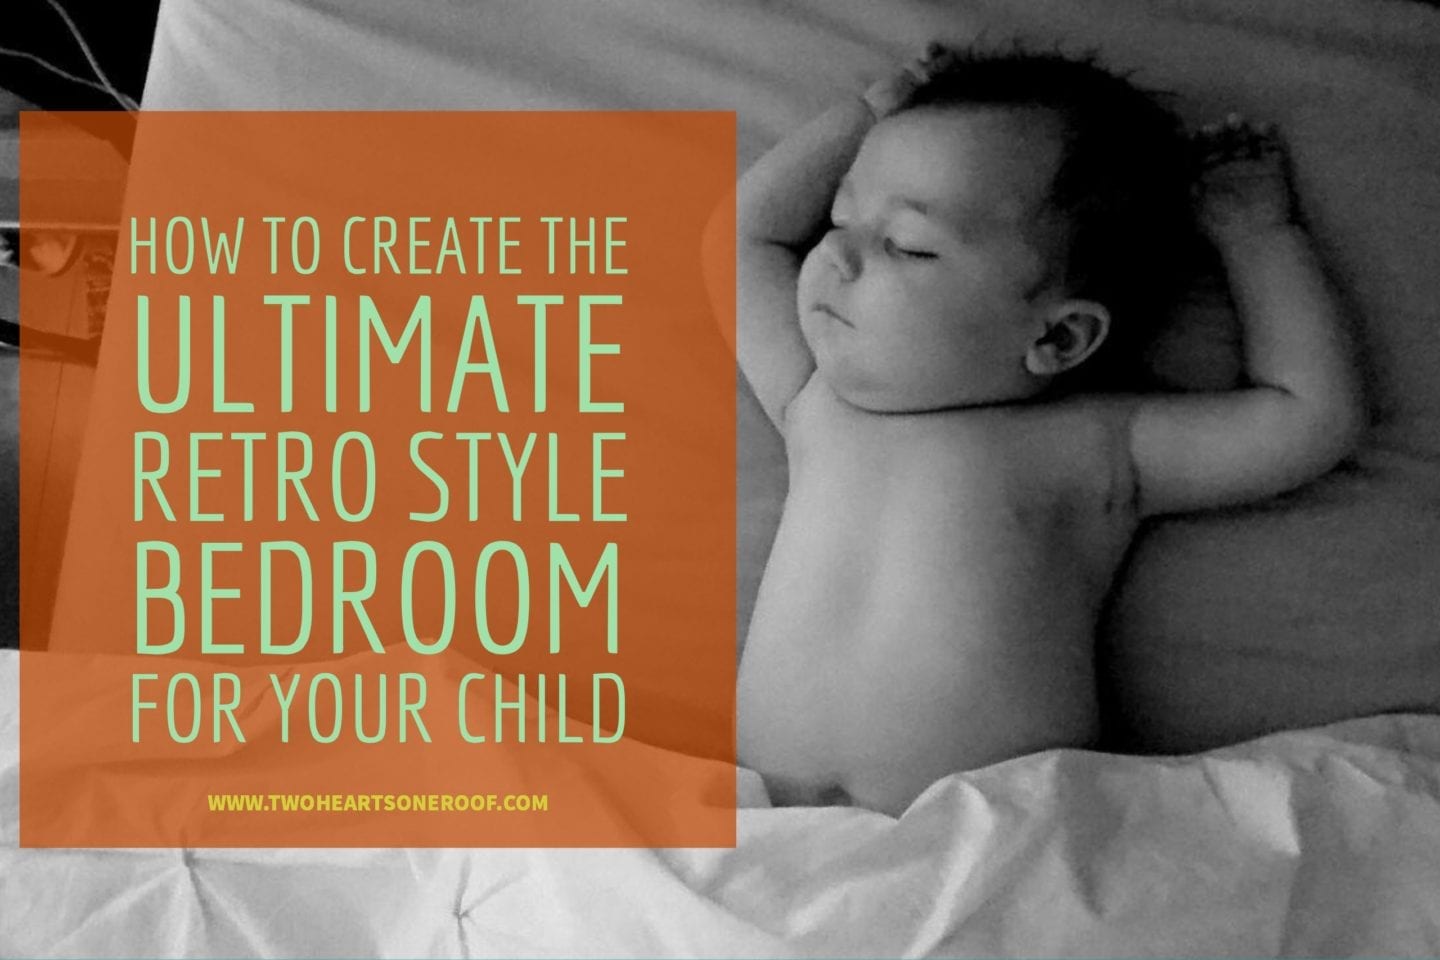 How To Create The Ultimate Retro Style Bedroom For Your Child